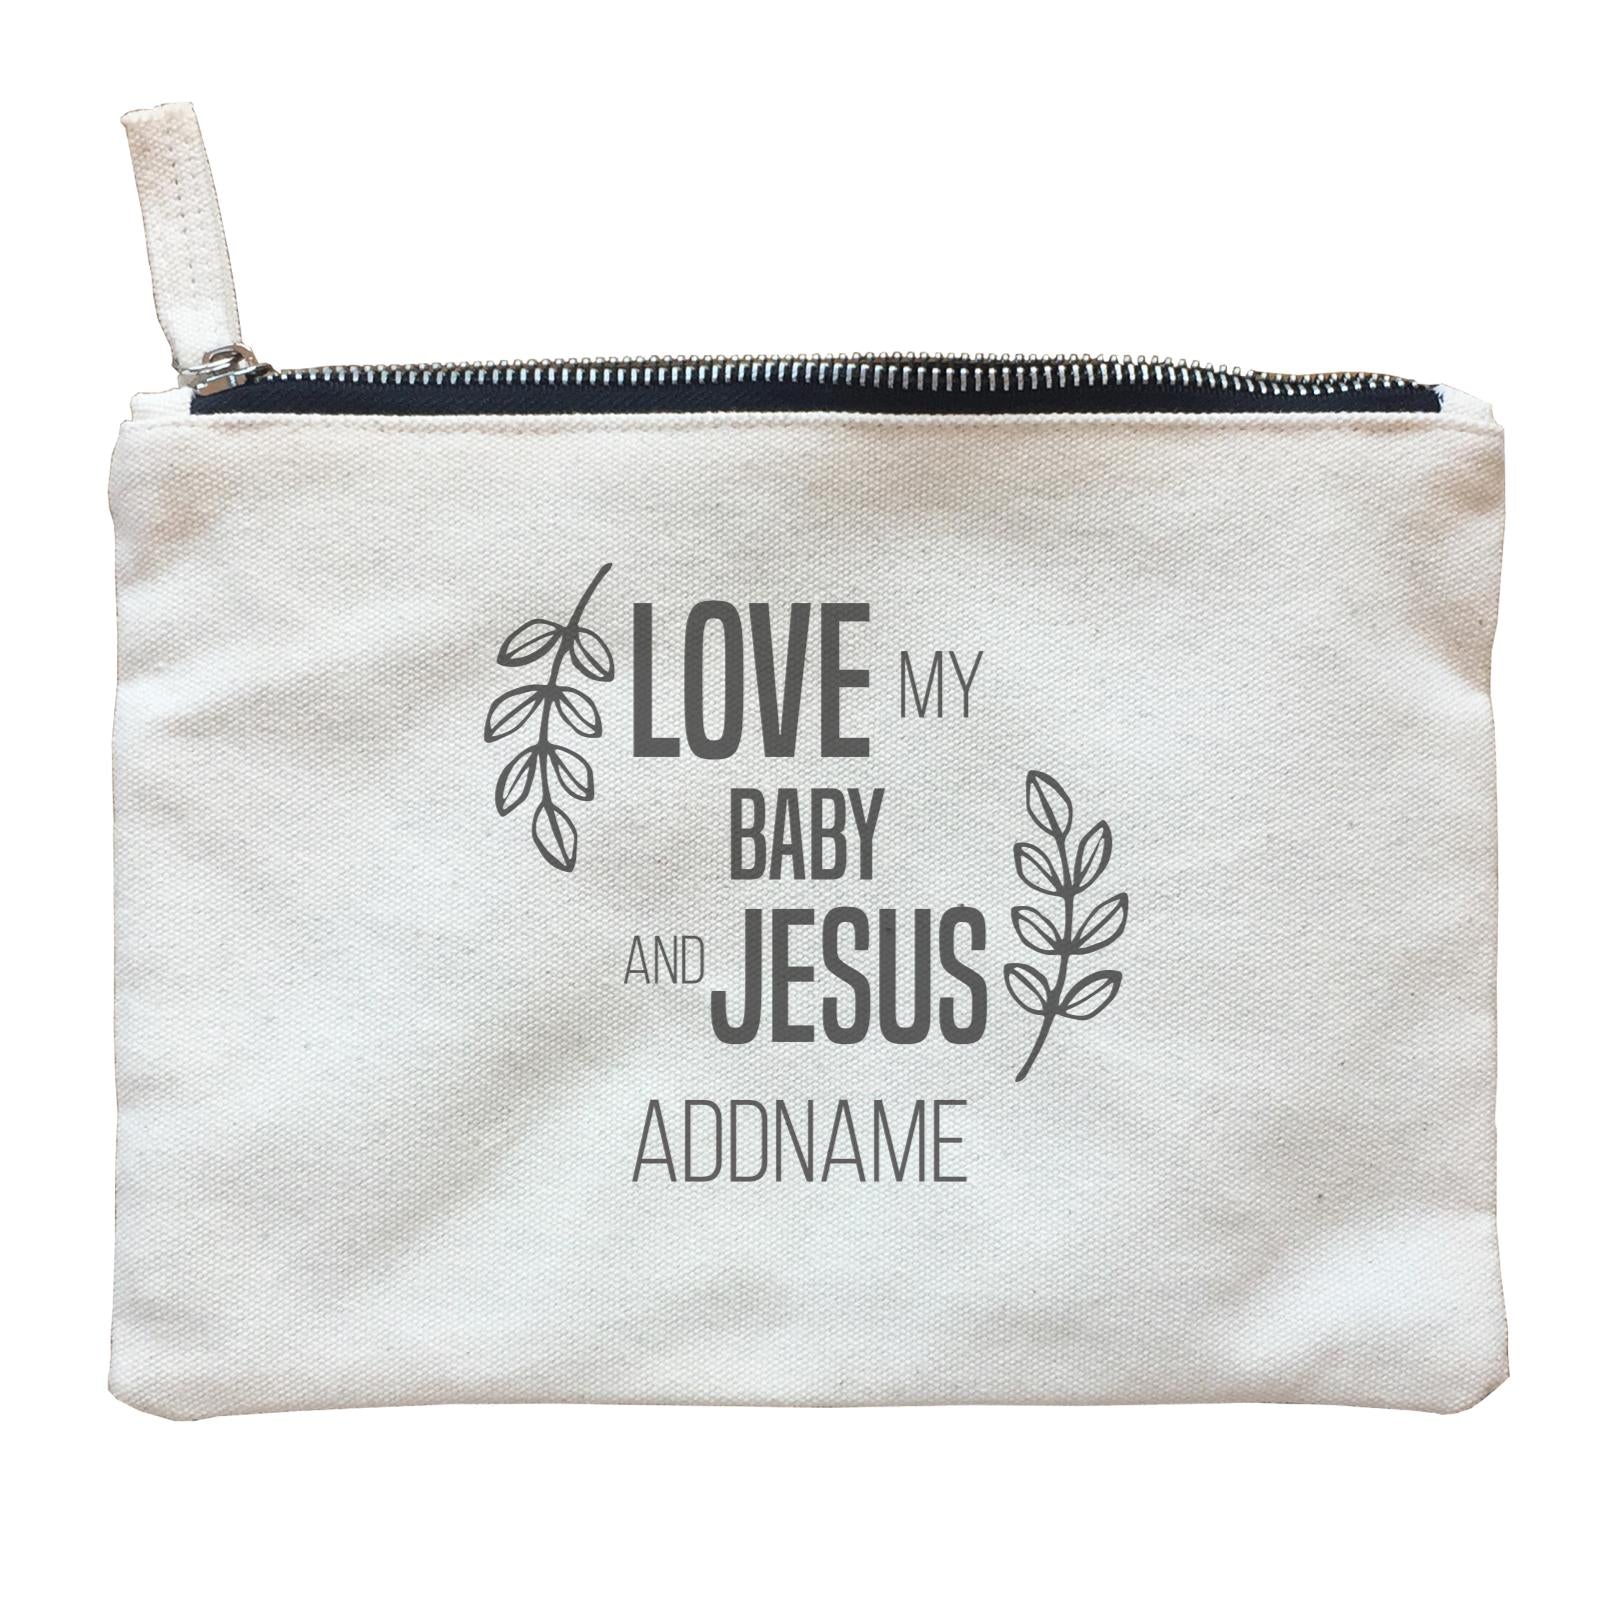 Christian Series Love My Baby And Jesus Addname Zipper Pouch